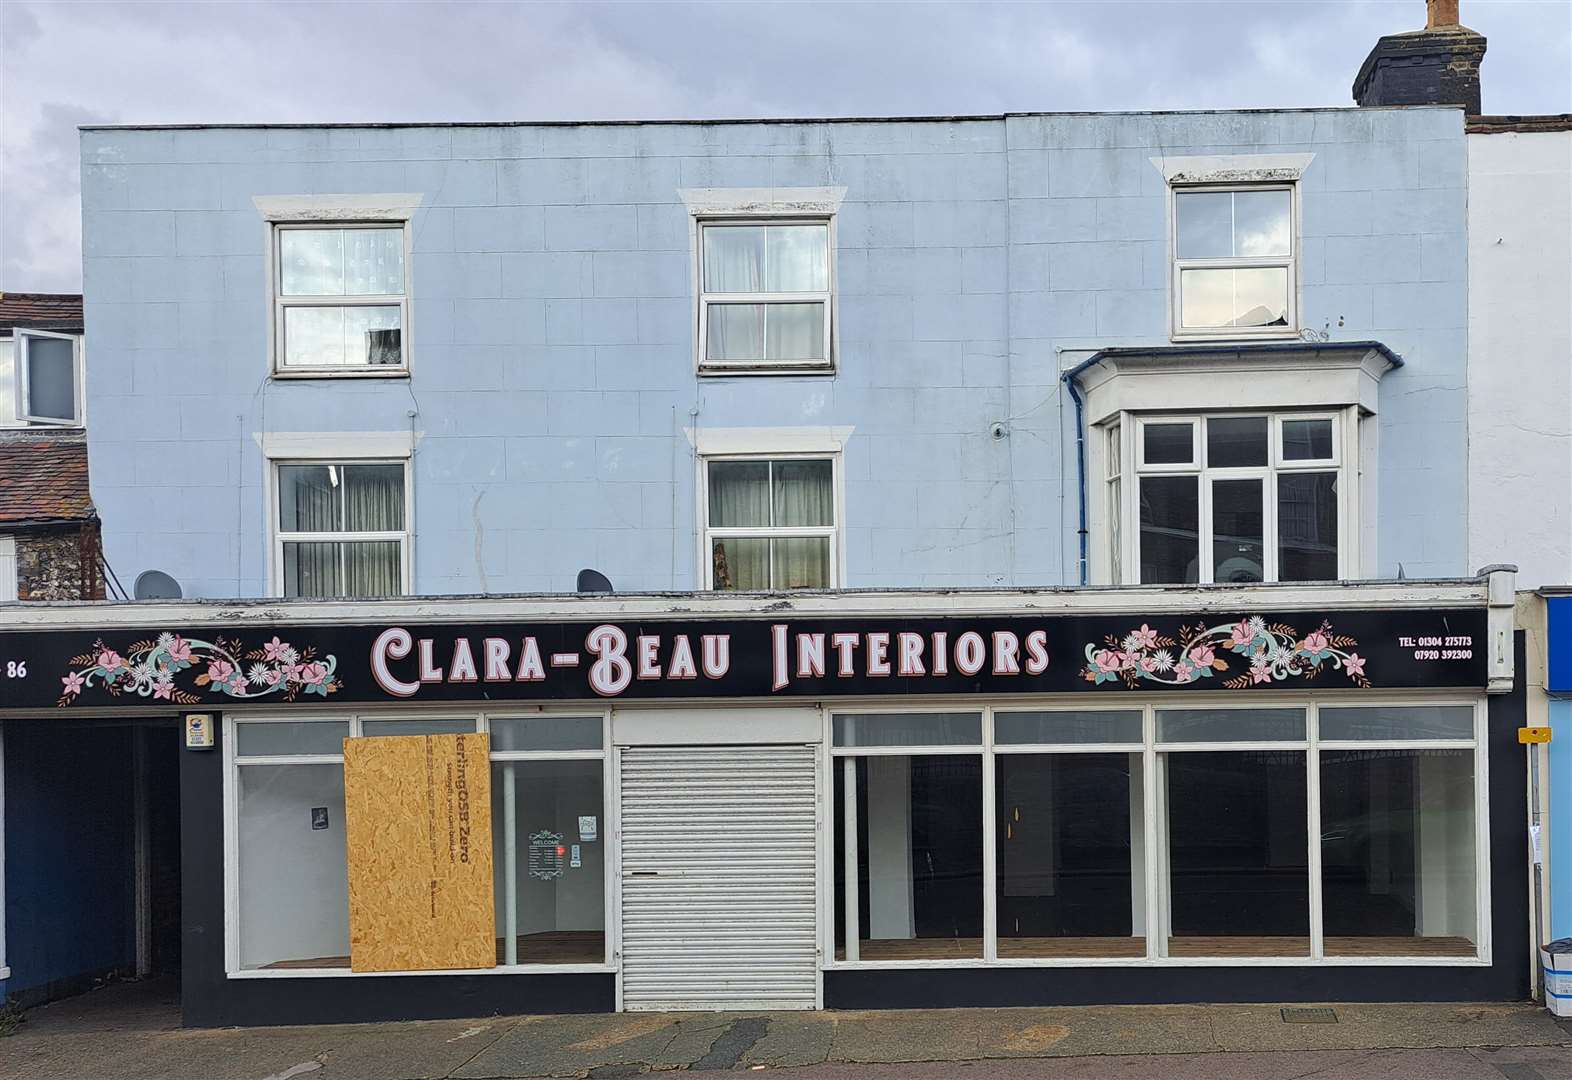 Clara-Beau Interiors, which will be replaced by the café bar in London Road, Dover